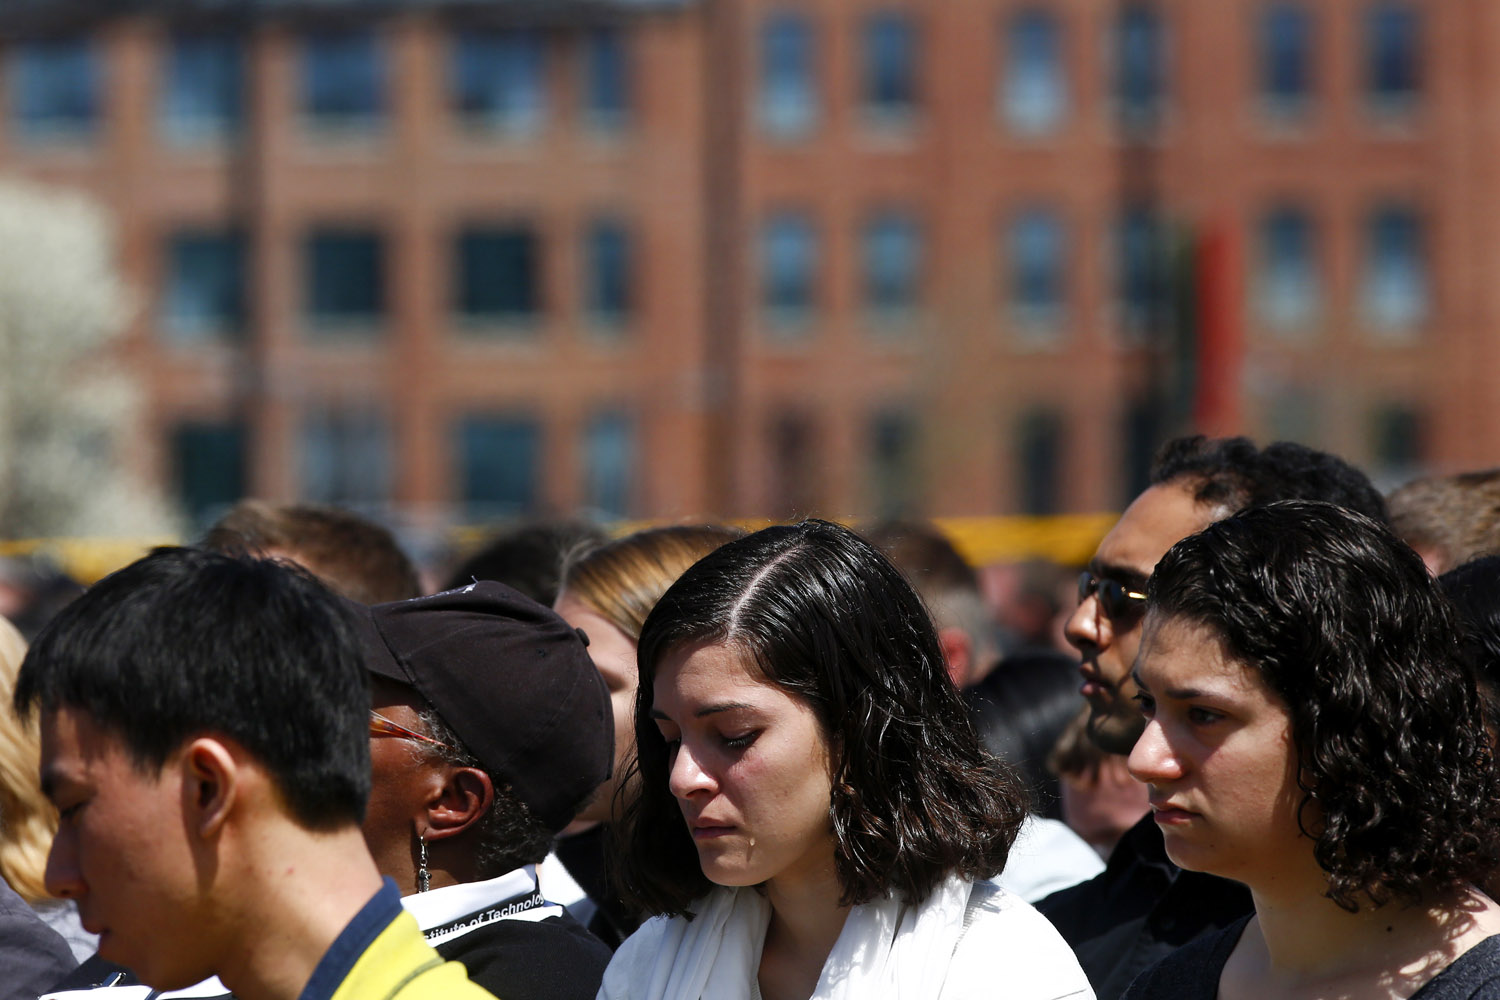 A woman cries during a memorial service for Massachusetts Institute of Technology police officer Sean Collier.